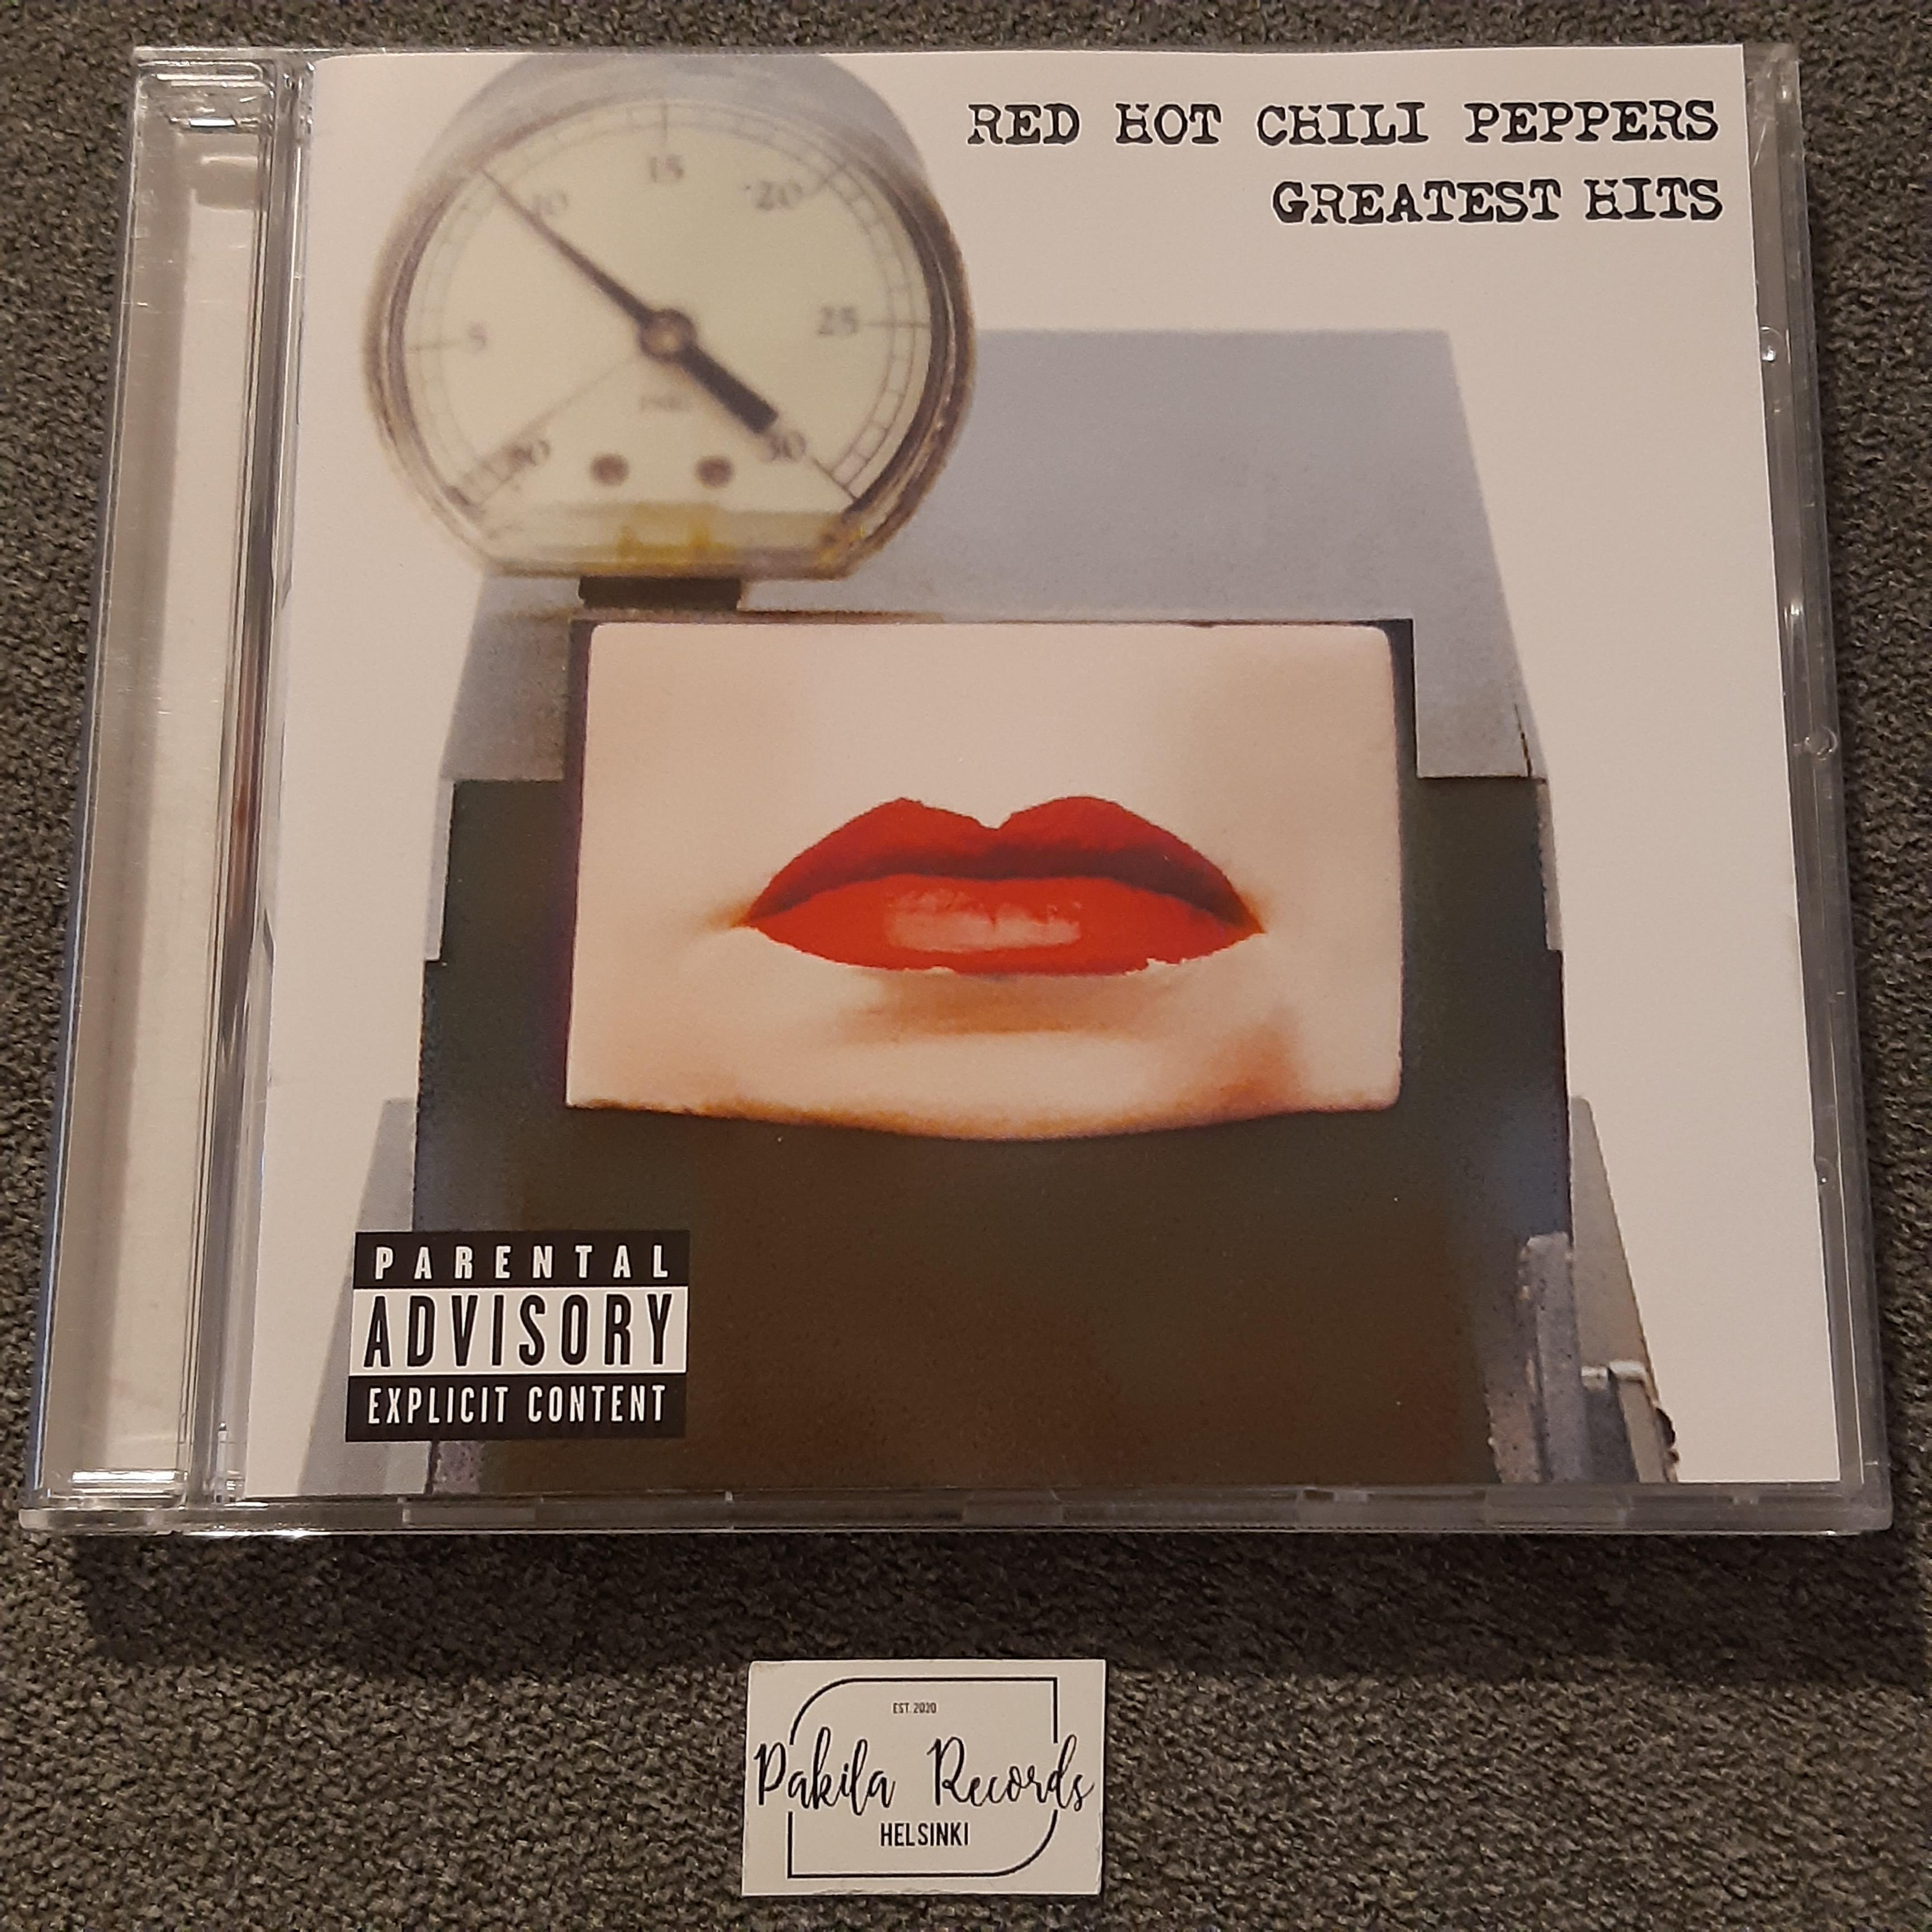 Red Hot Chili Peppers - Greatest Hits - CD (käytetty)